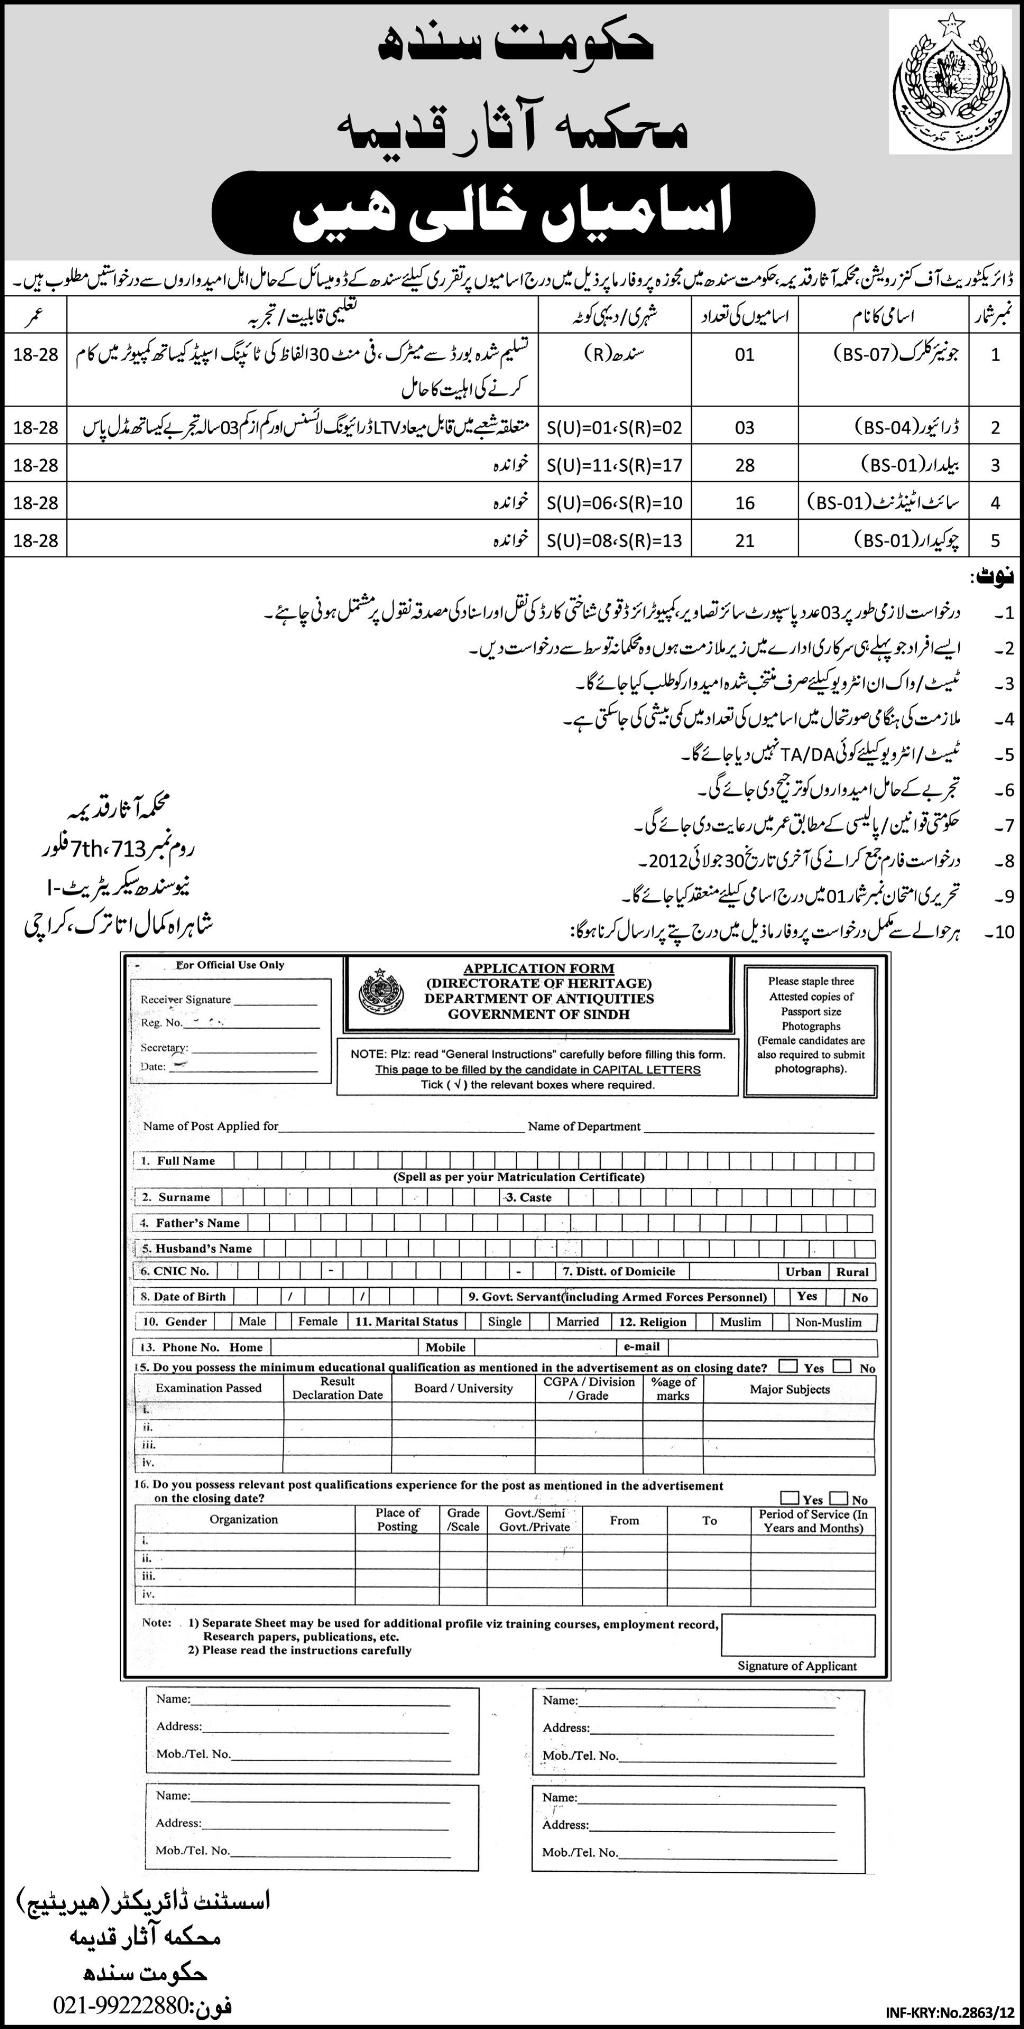 Department of Antiquities Requires Junior Clerk and Lower Staff (Government of Sindh)